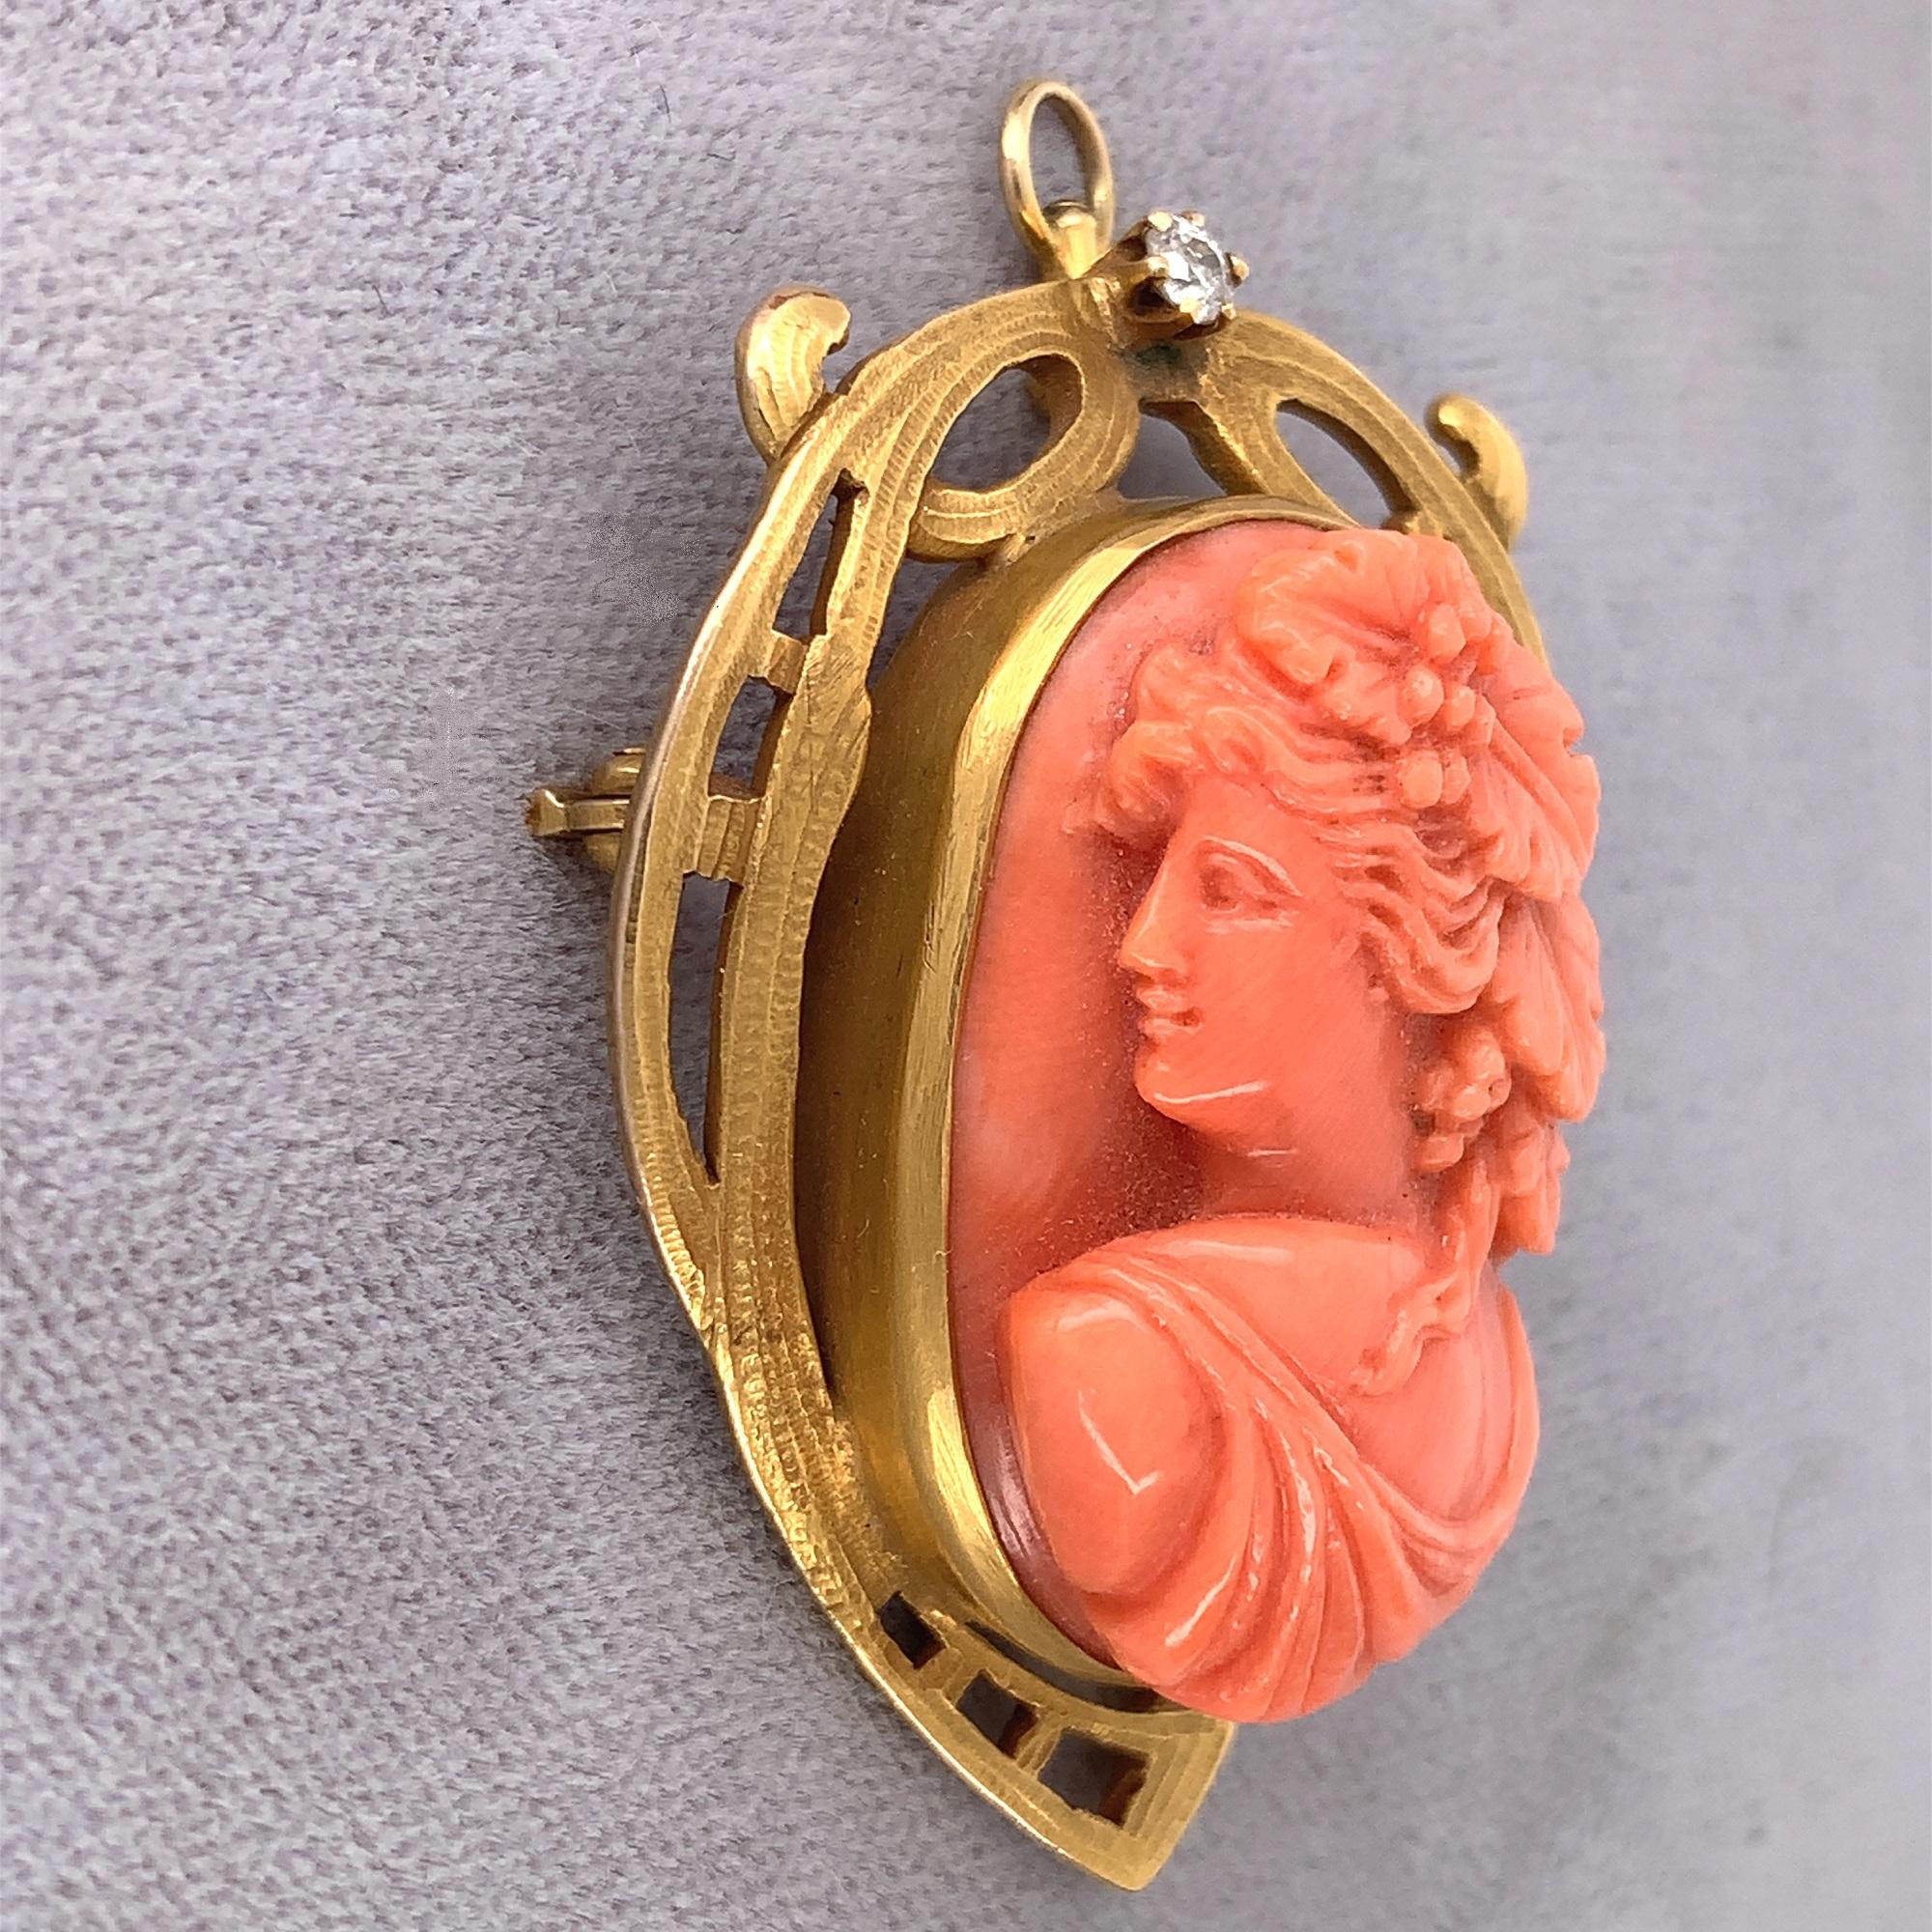 14K yellow gold Art Nouveau coral cameo pin featuring a large portrait of a woman with grapes and grape leaves in her hair. The crisp detailed cameo measures about 28mm x 20mm. Accenting the Art Nouveau cast setting is a small European cut diamond